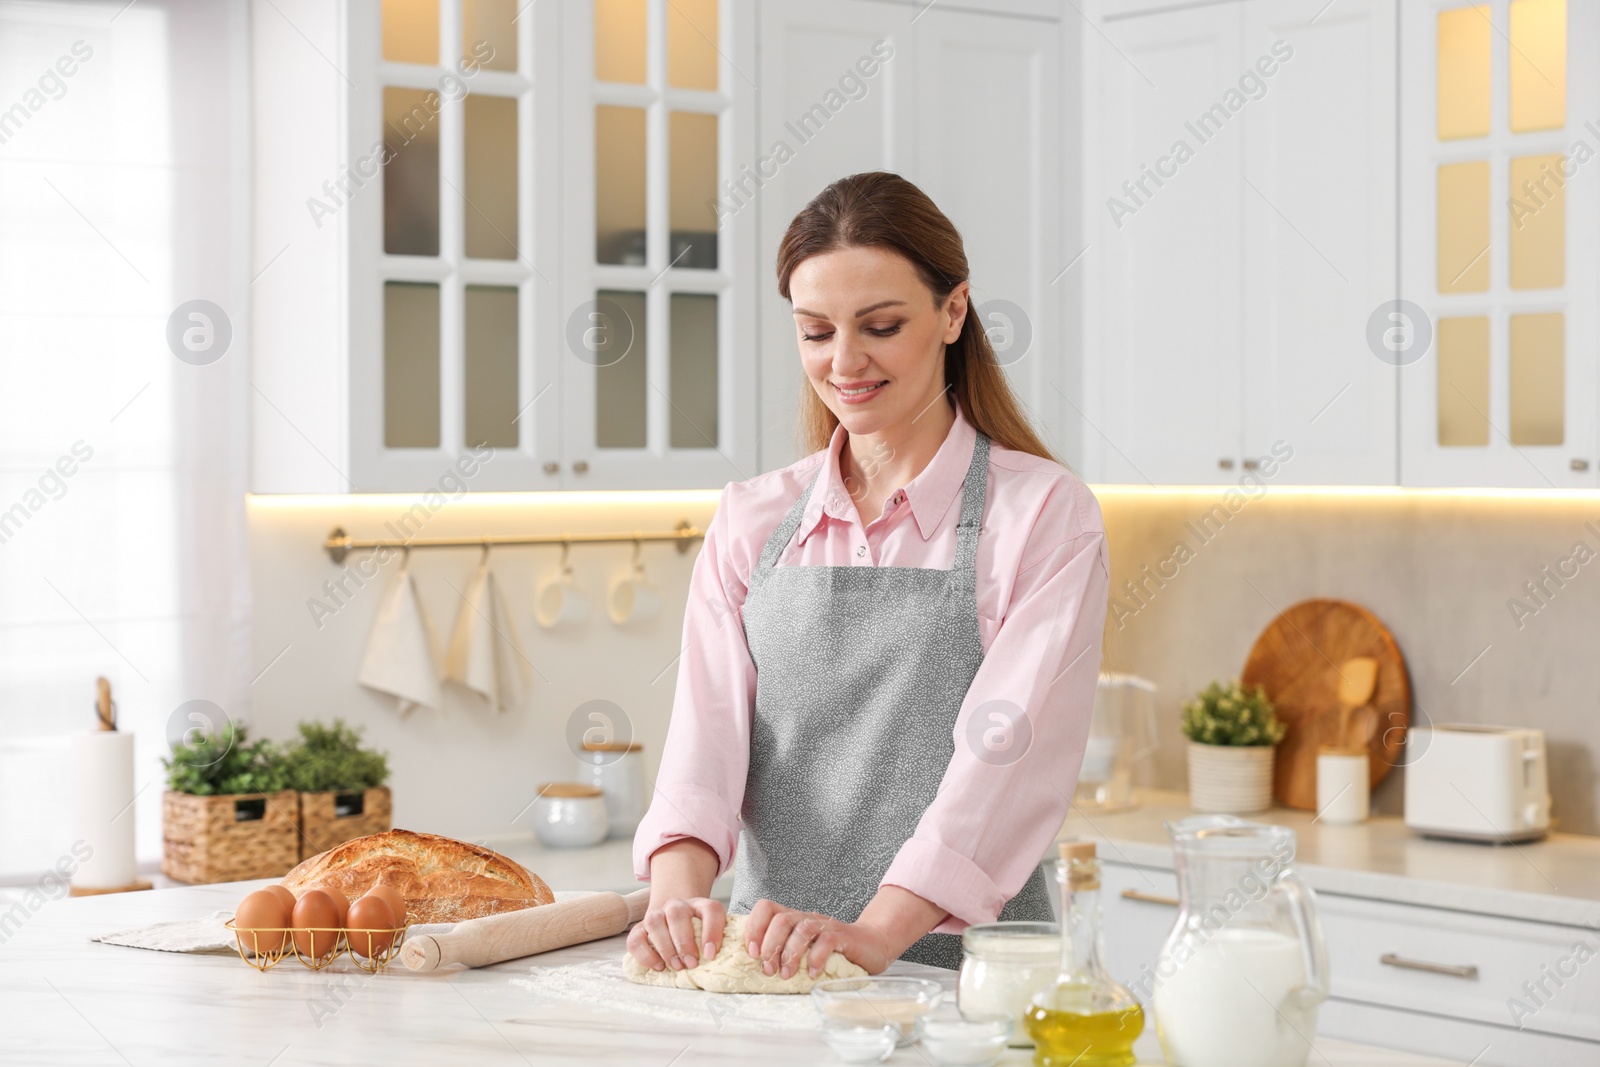 Photo of Making bread. Woman kneading dough at white table in kitchen